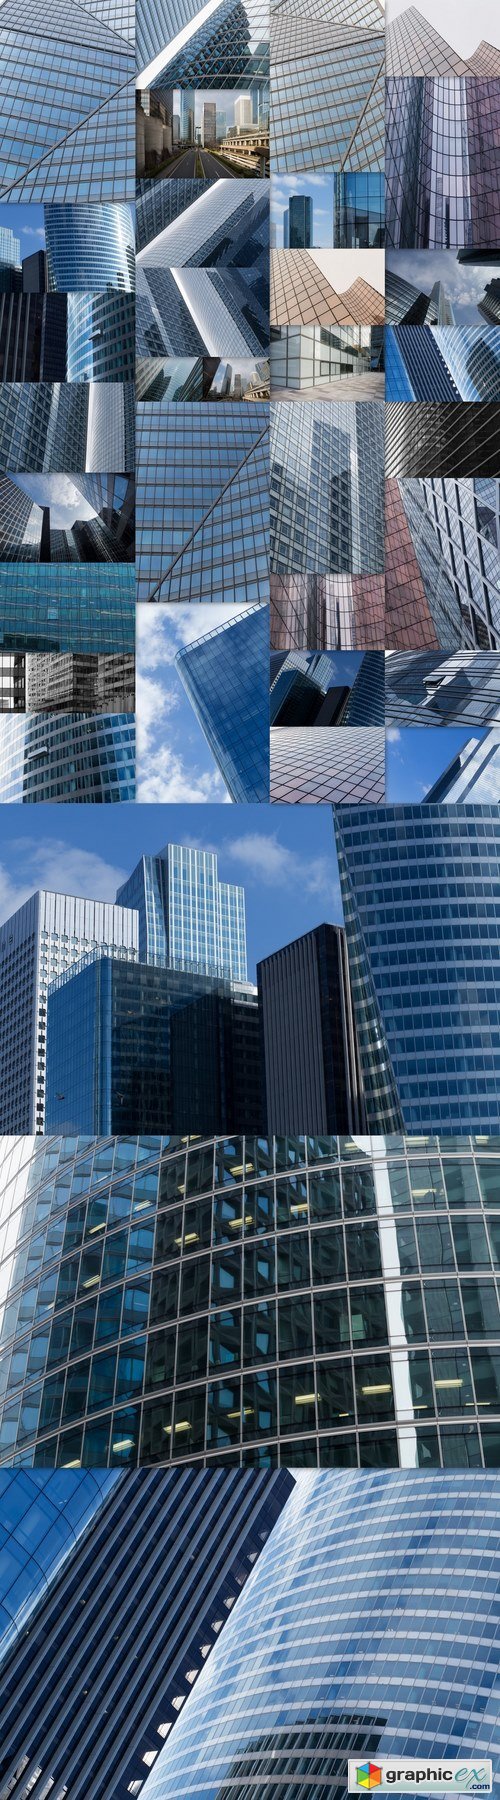 Skyscrapers with glass facade